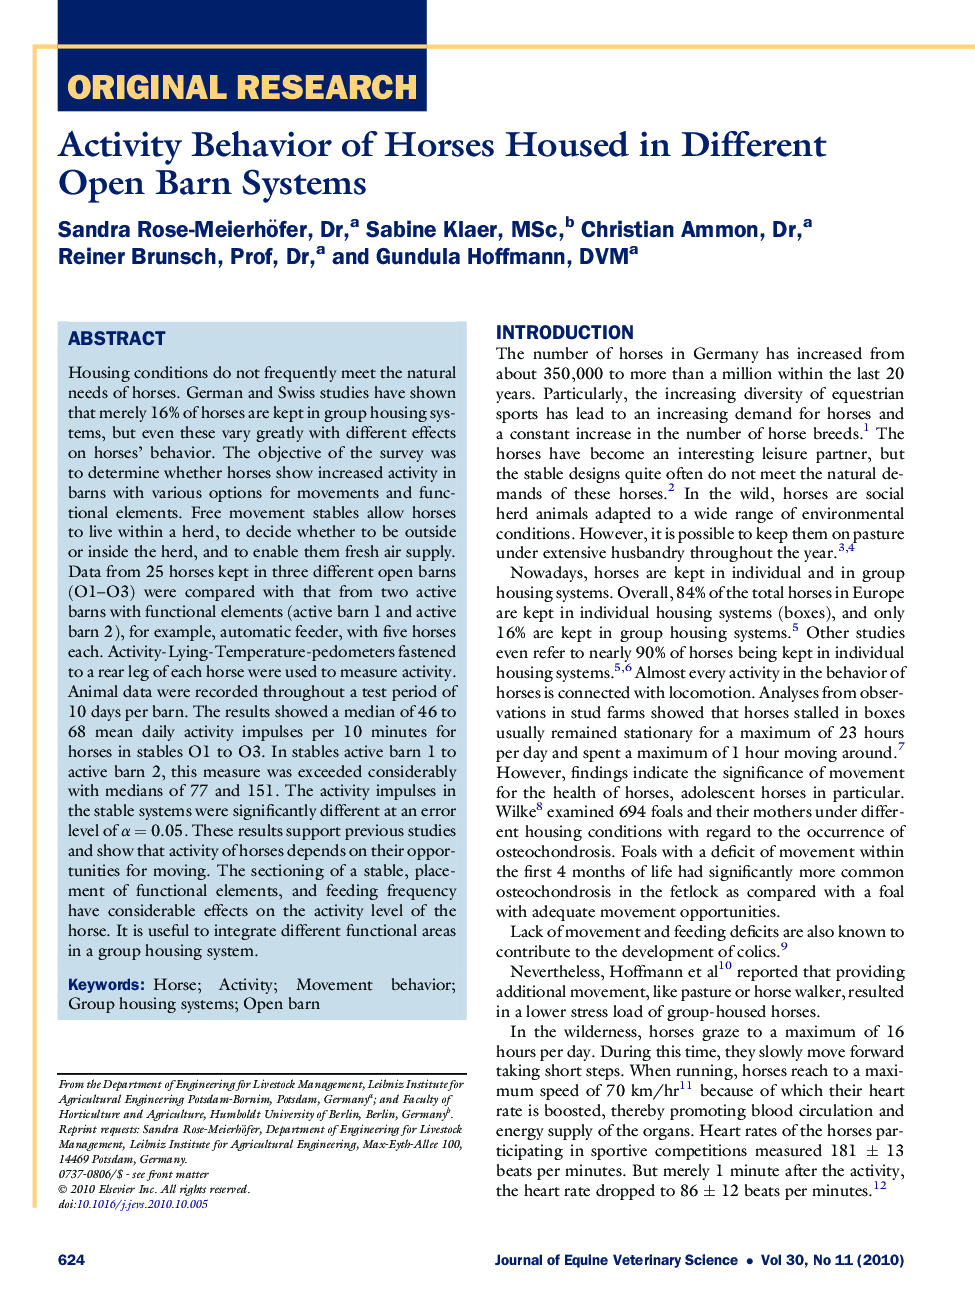 Activity Behavior of Horses Housed in Different Open Barn Systems